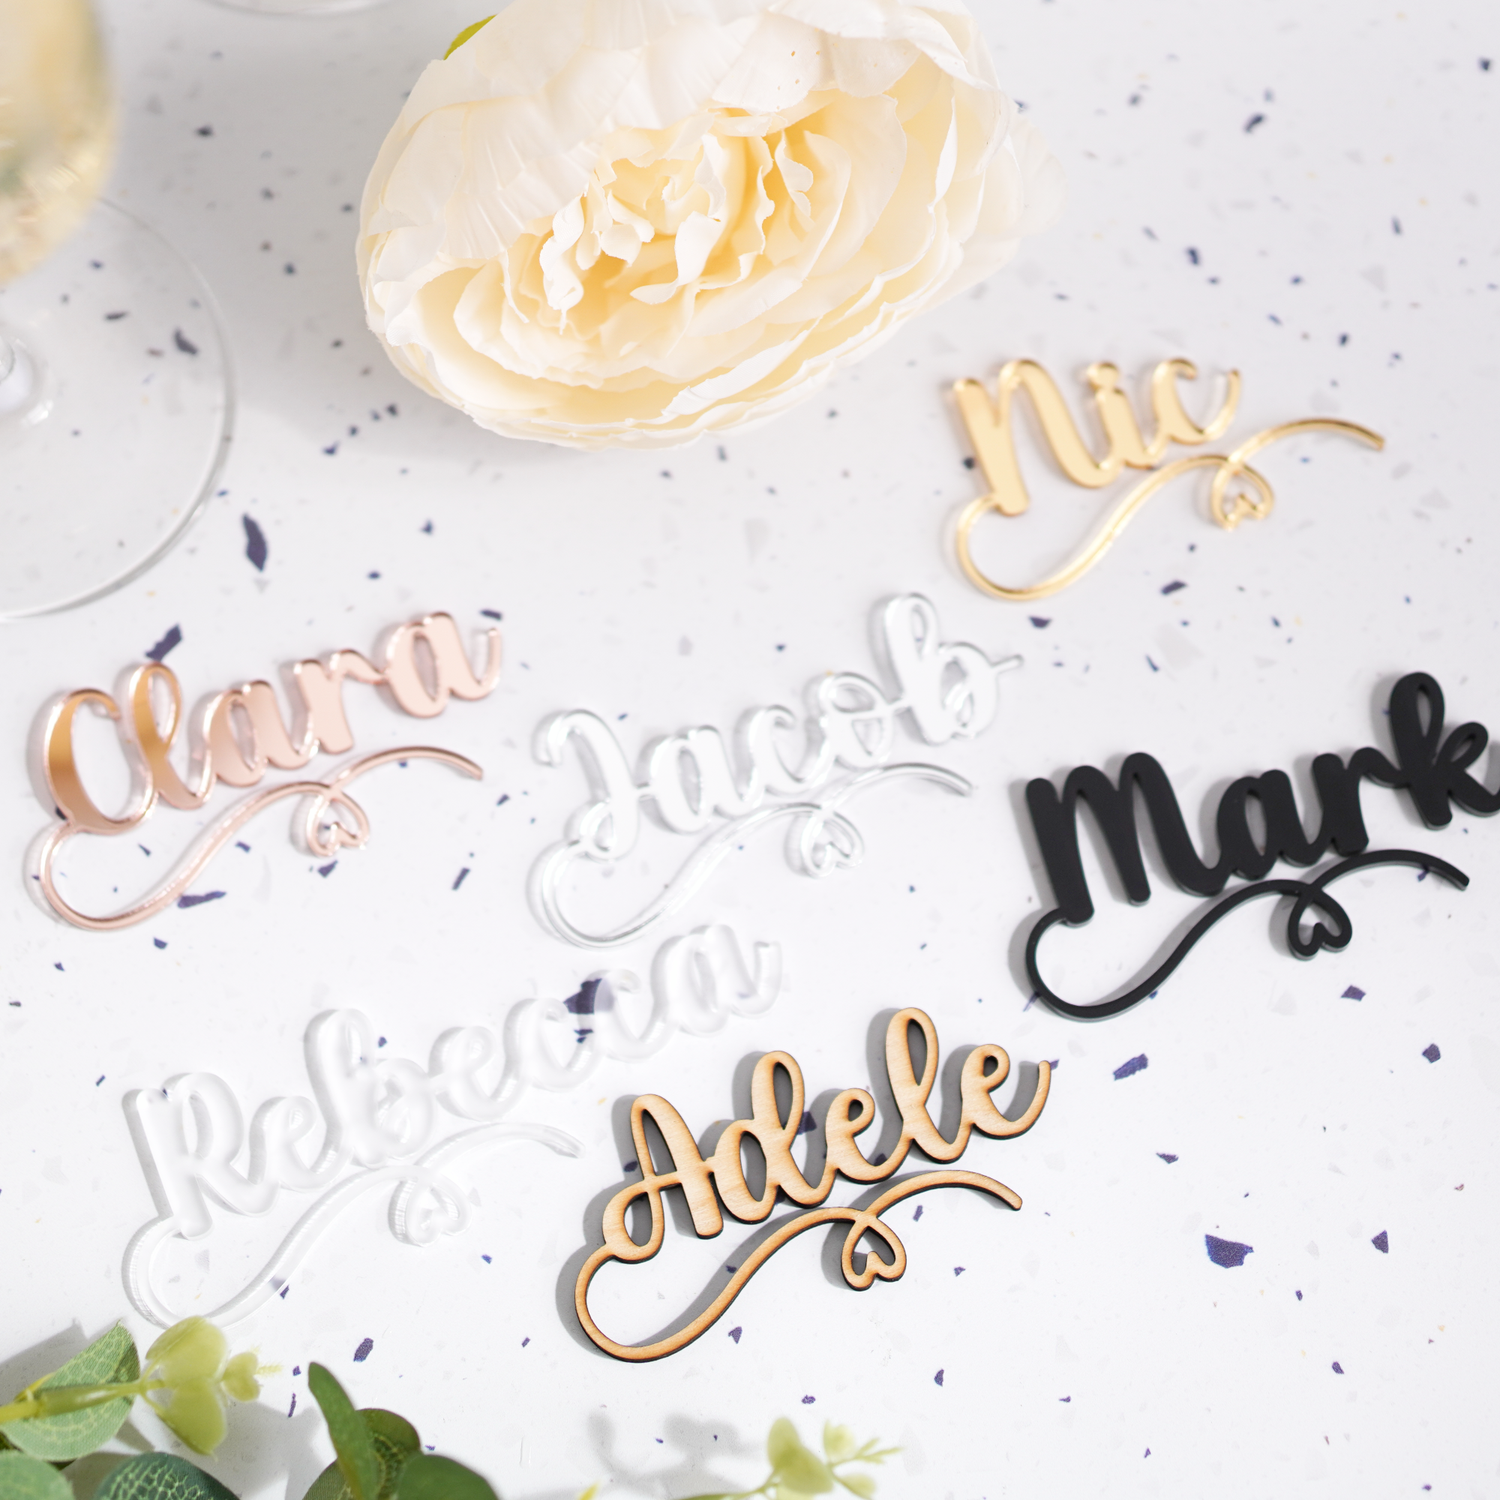 personalised name charms for wedding table decorations and drink glasses